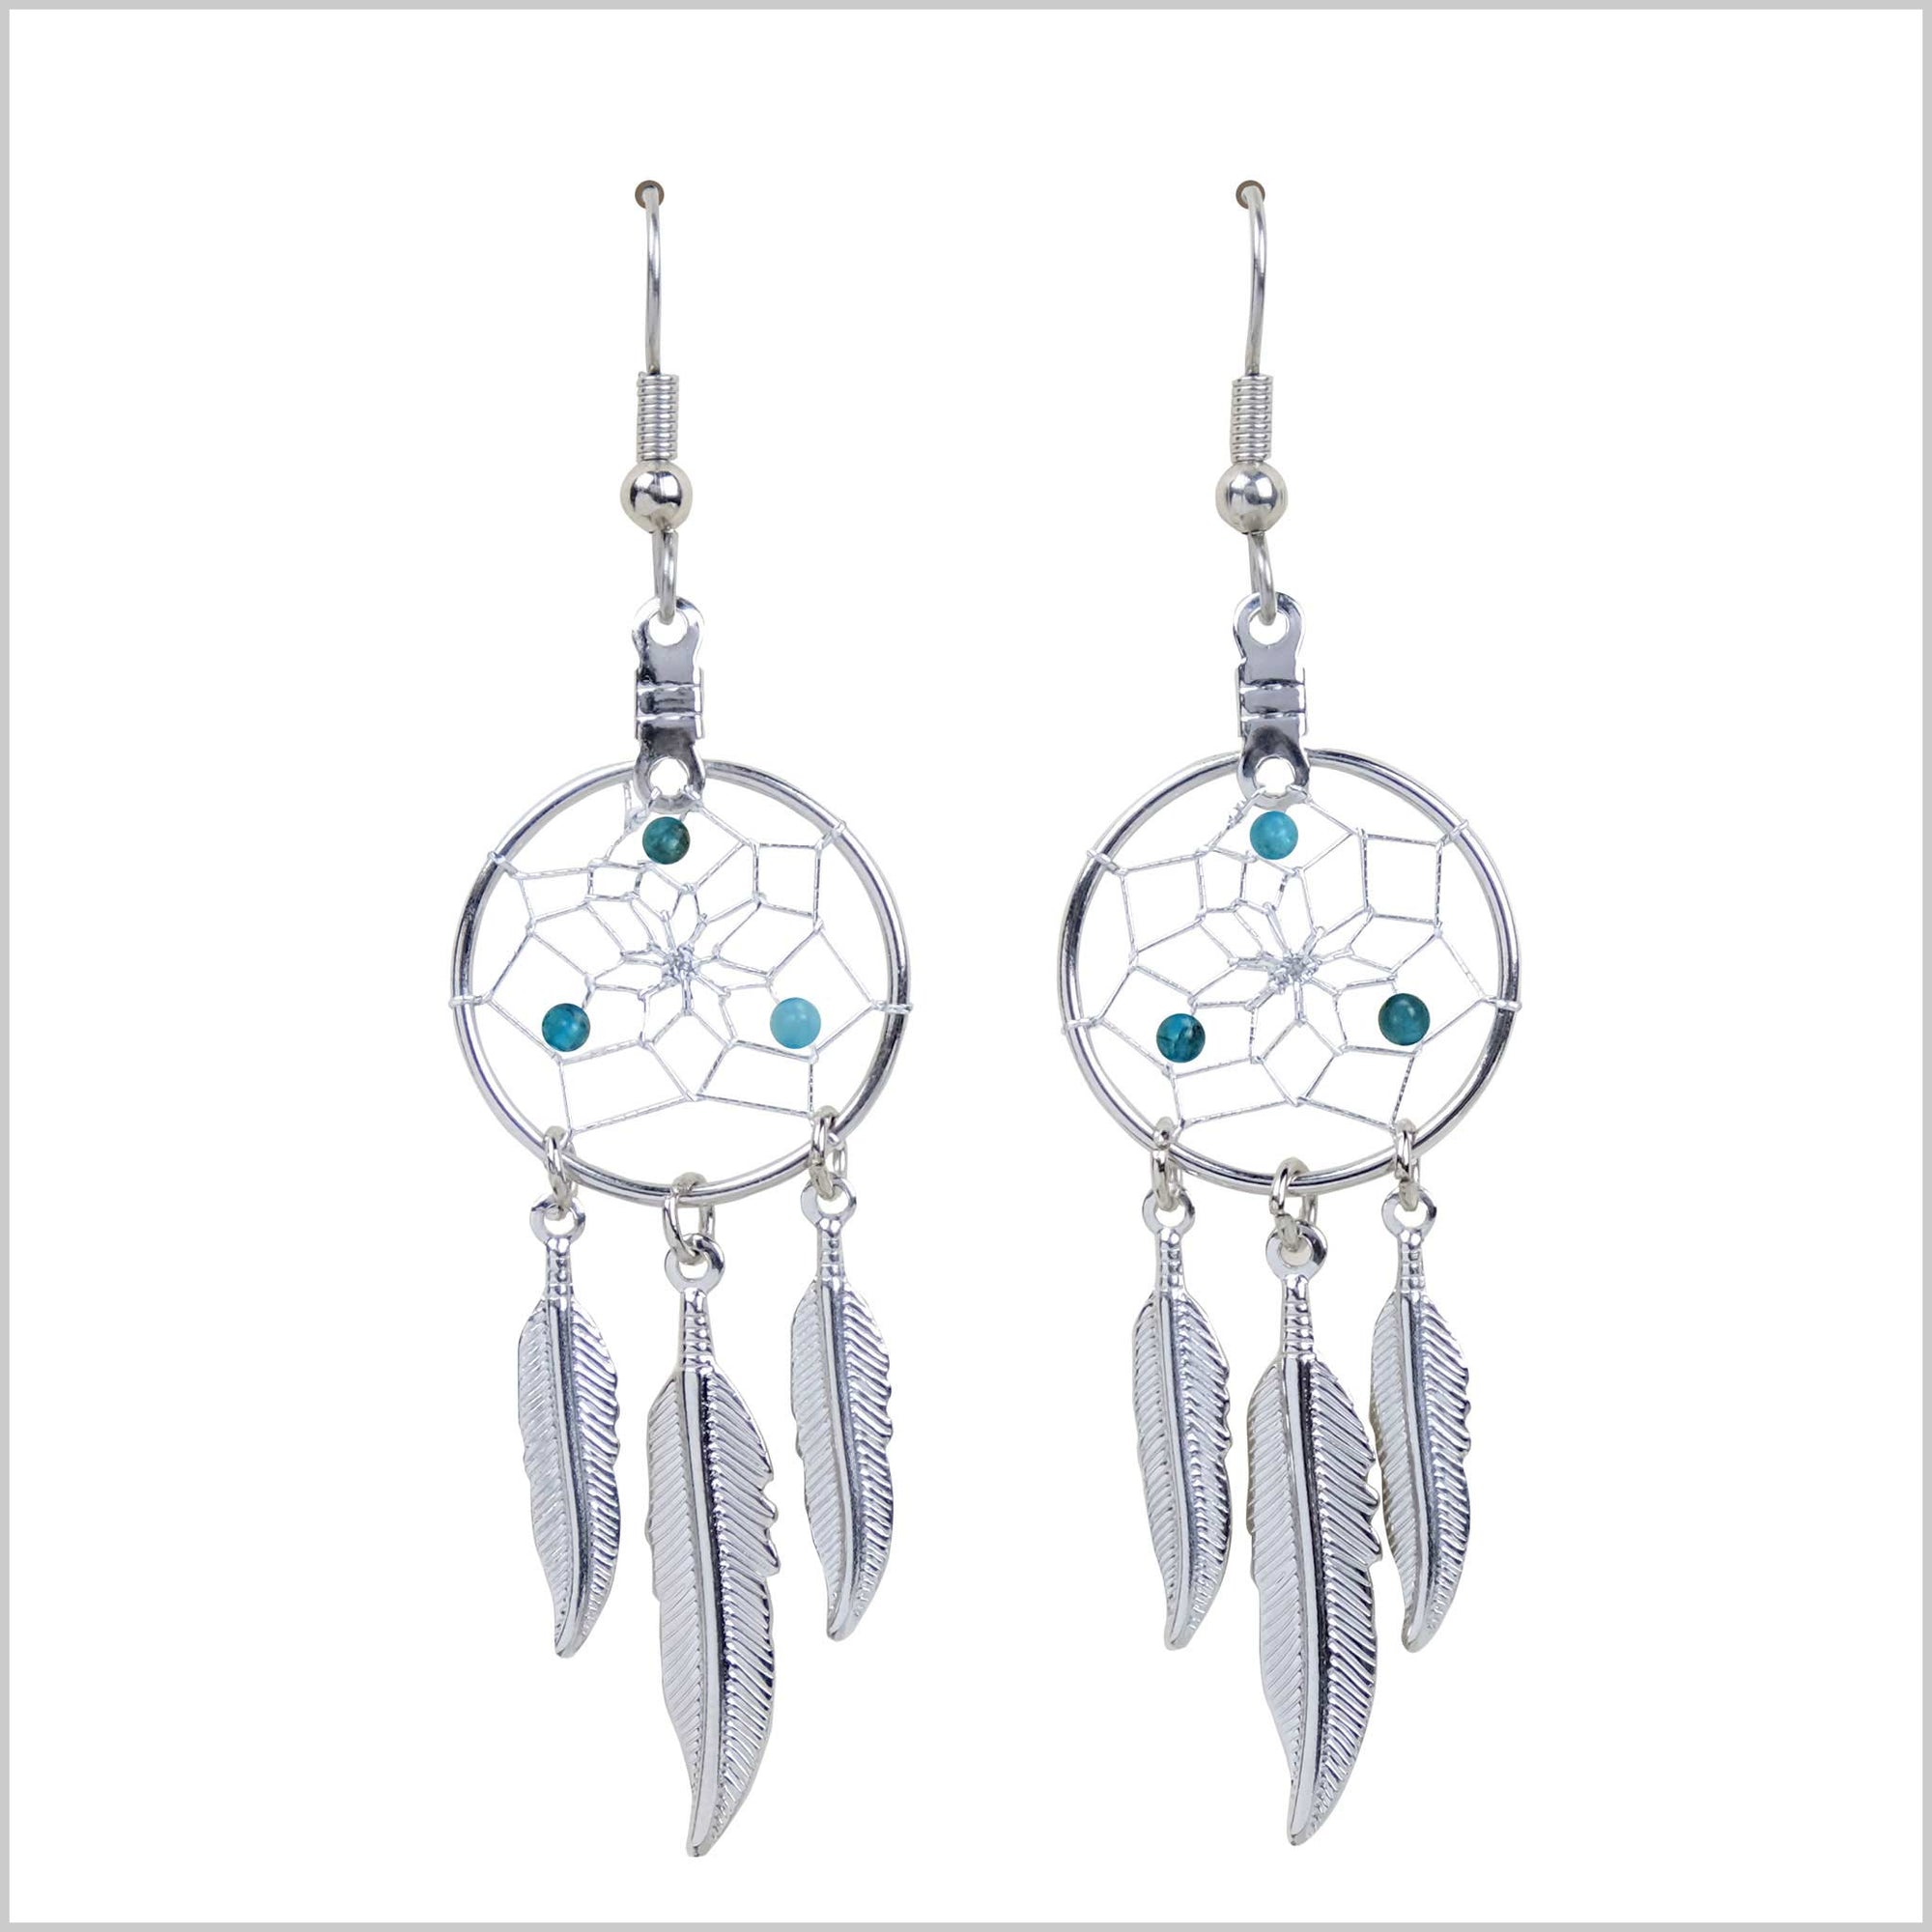 Earrings Dream Catcher  Birthstone March-Aqua Marine Jewellery - Earrings Dream Catcher  Birthstone March-Aqua Marine Jewellery -  - House of Himwitsa Native Art Gallery and Gifts